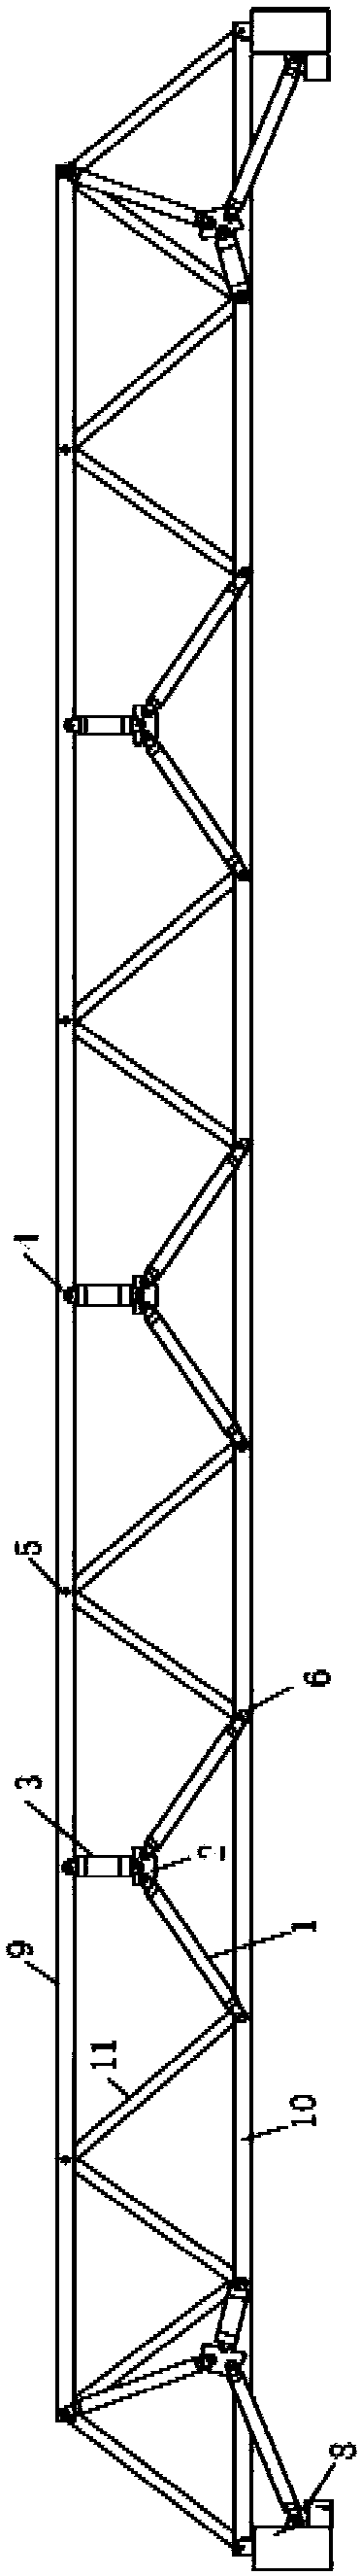 Fabricated-type truss structure comprising elbow-joint-type multi-dimensional vibration reduction rod piece